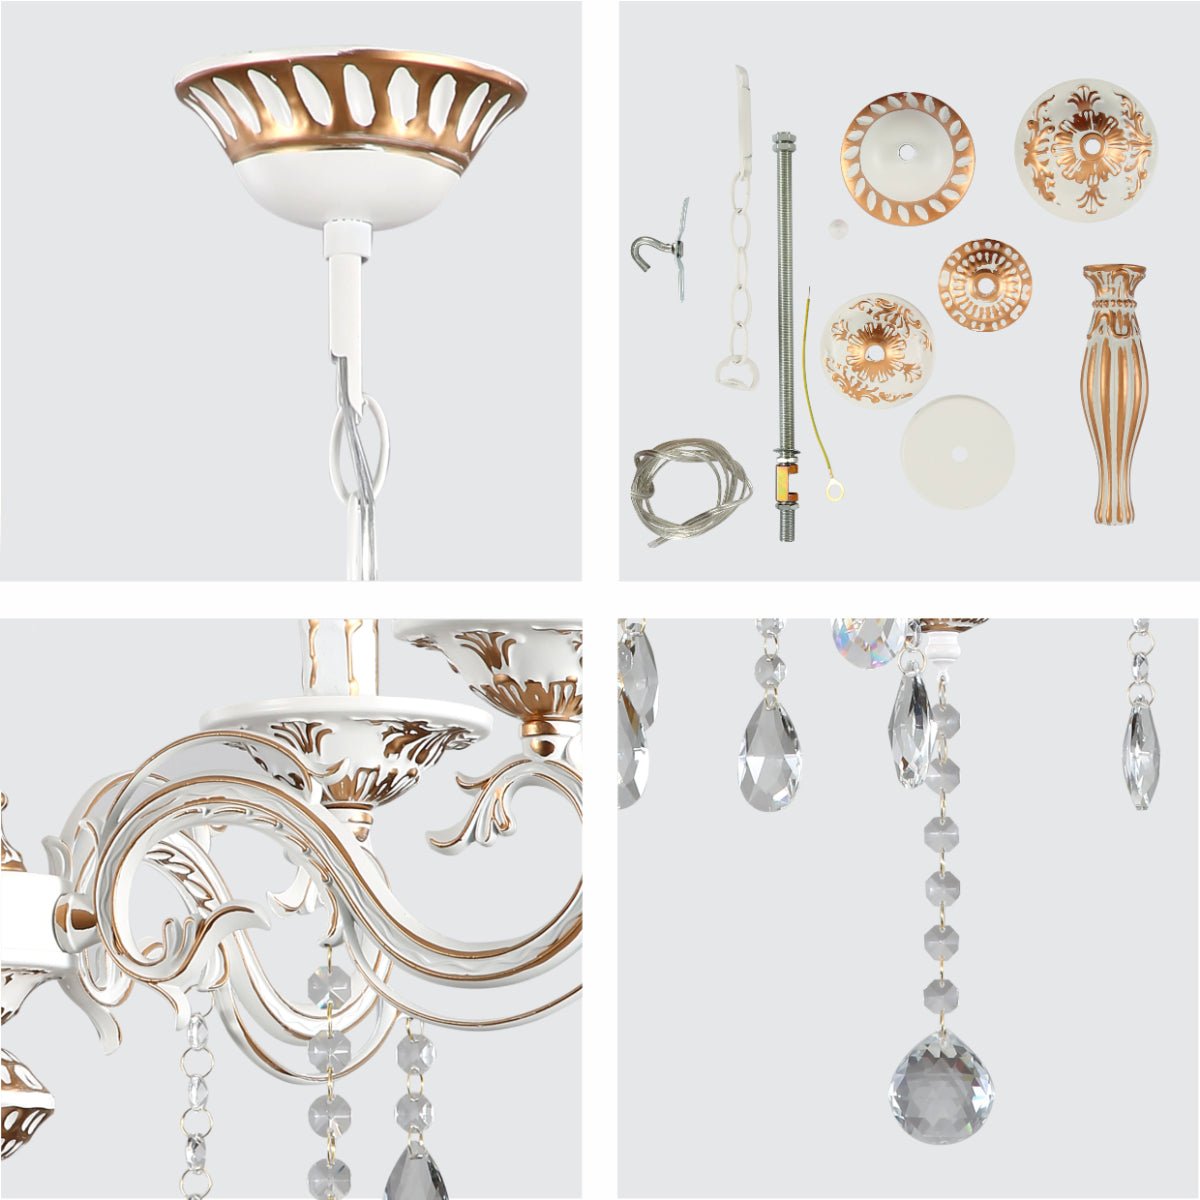 Detailed shots of 5 Arm Chandelier Light Ceiling Light Traditional French Vintage Retro Candle Metal and Crystal Gold Aged Cream 5xE14 | TEKLED 159-17830